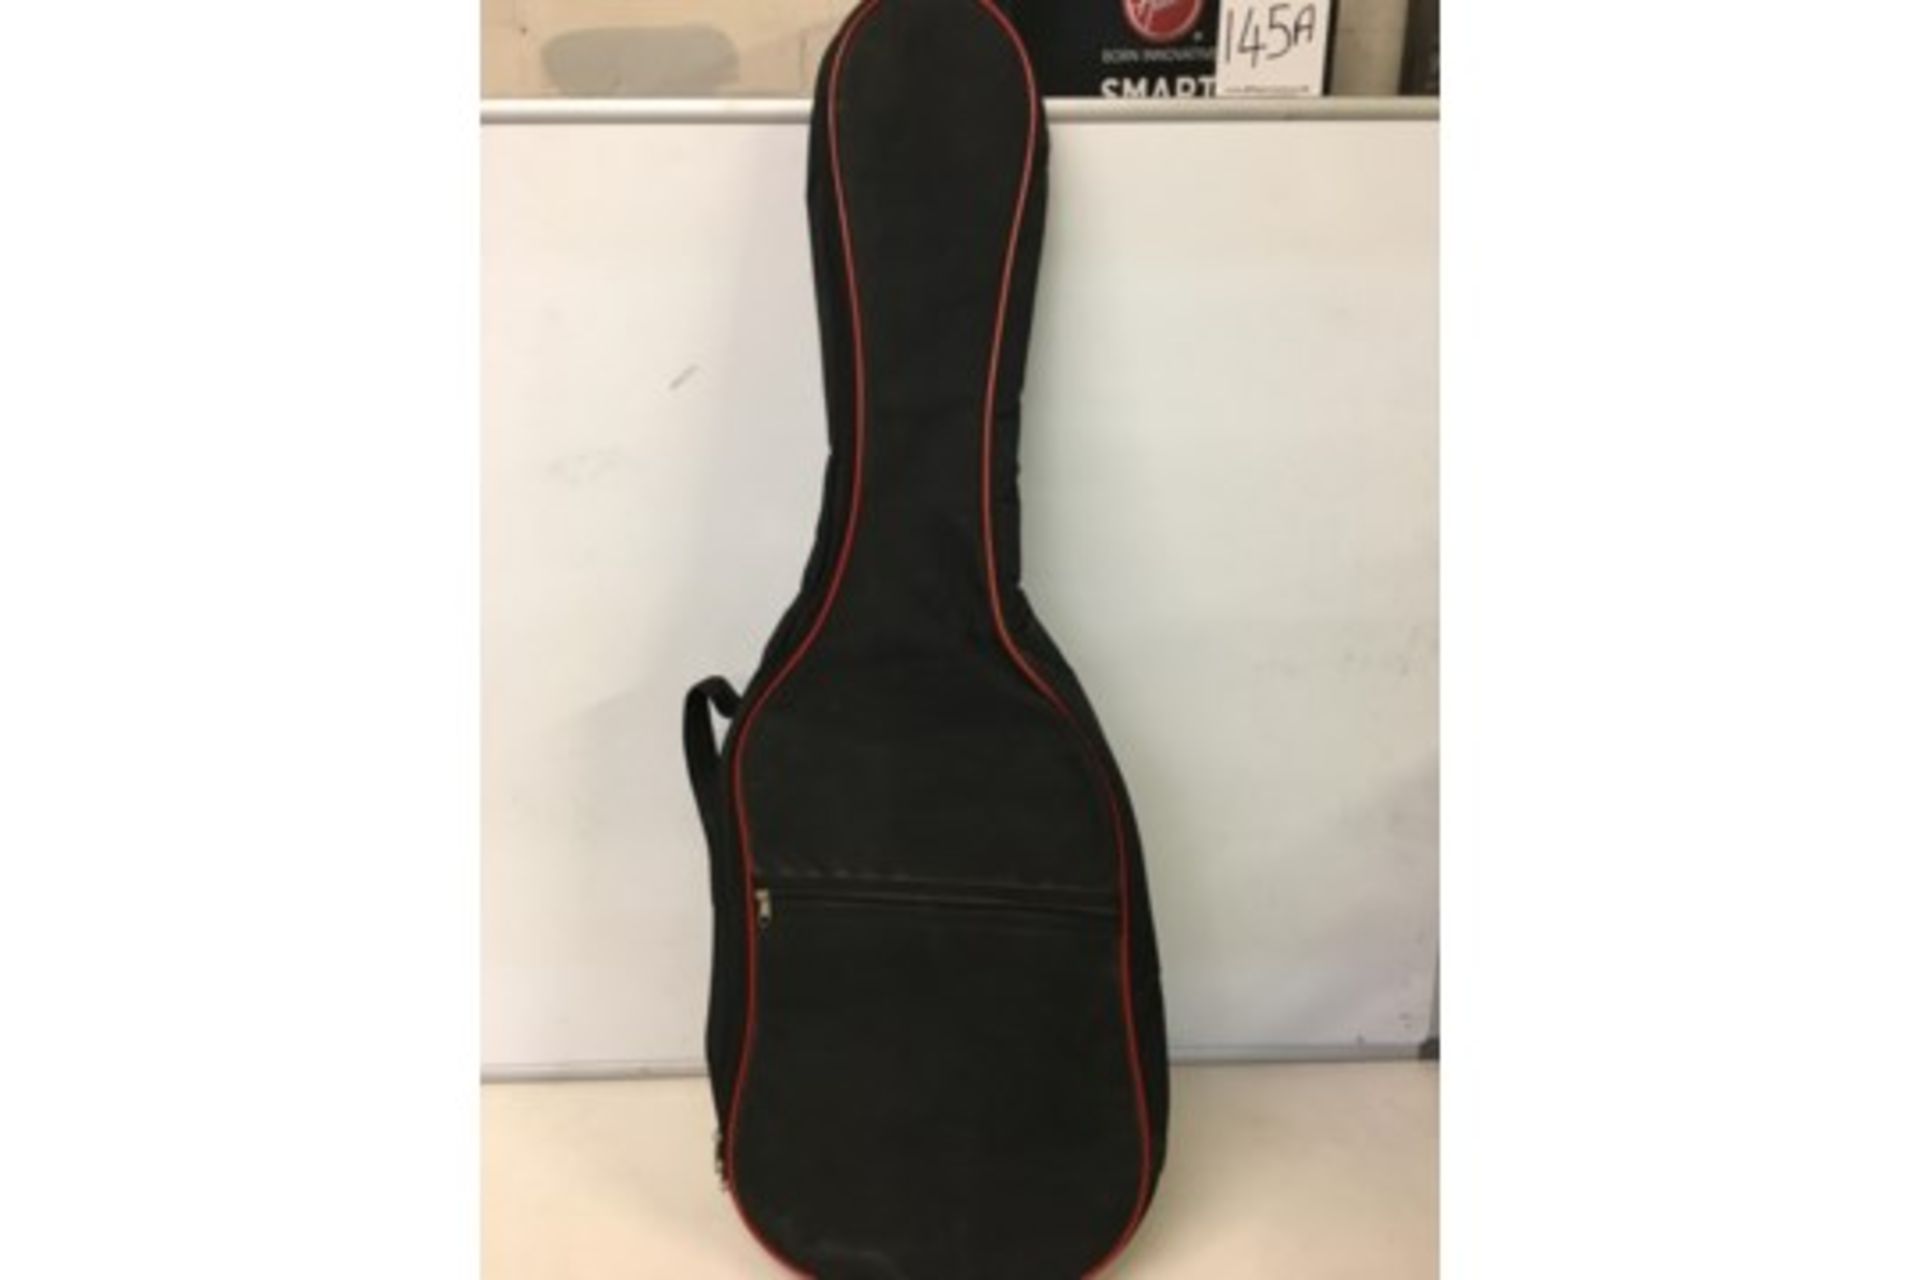 9 x Cushion Padded Guitar Case Covers - Image 6 of 7